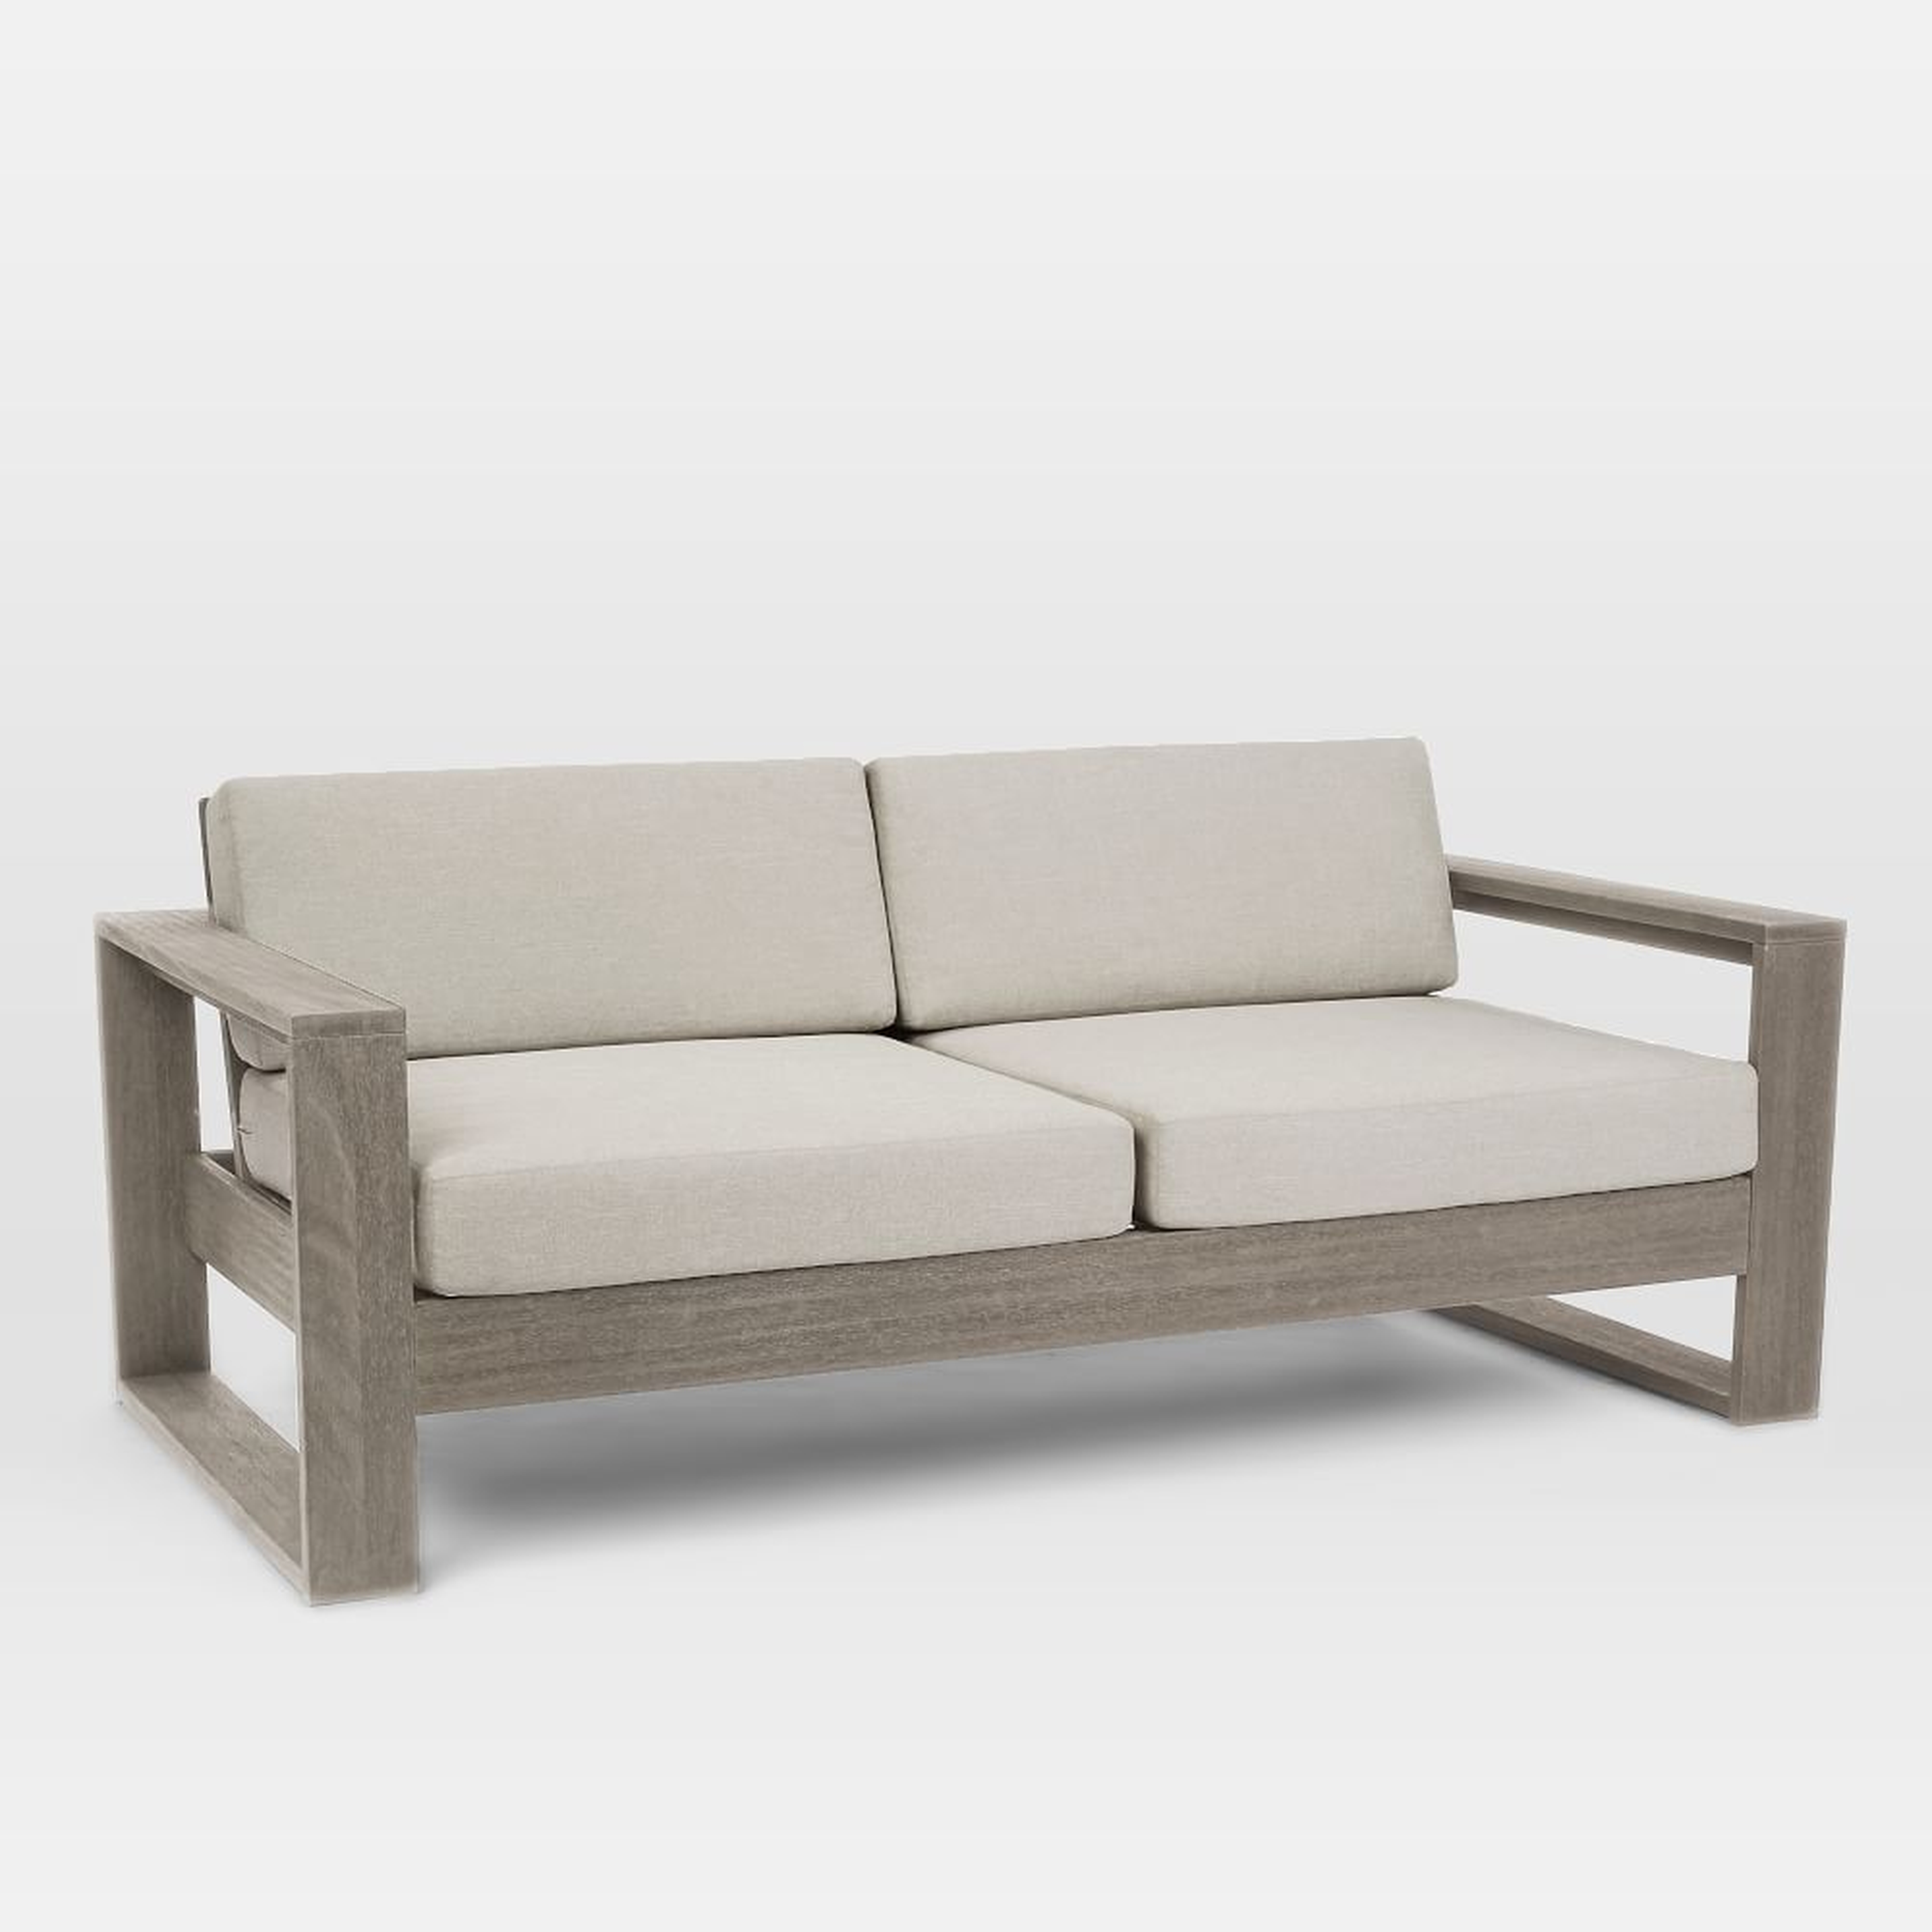 Portside Outdoor 75 in Sofa, Weathered Gray - West Elm